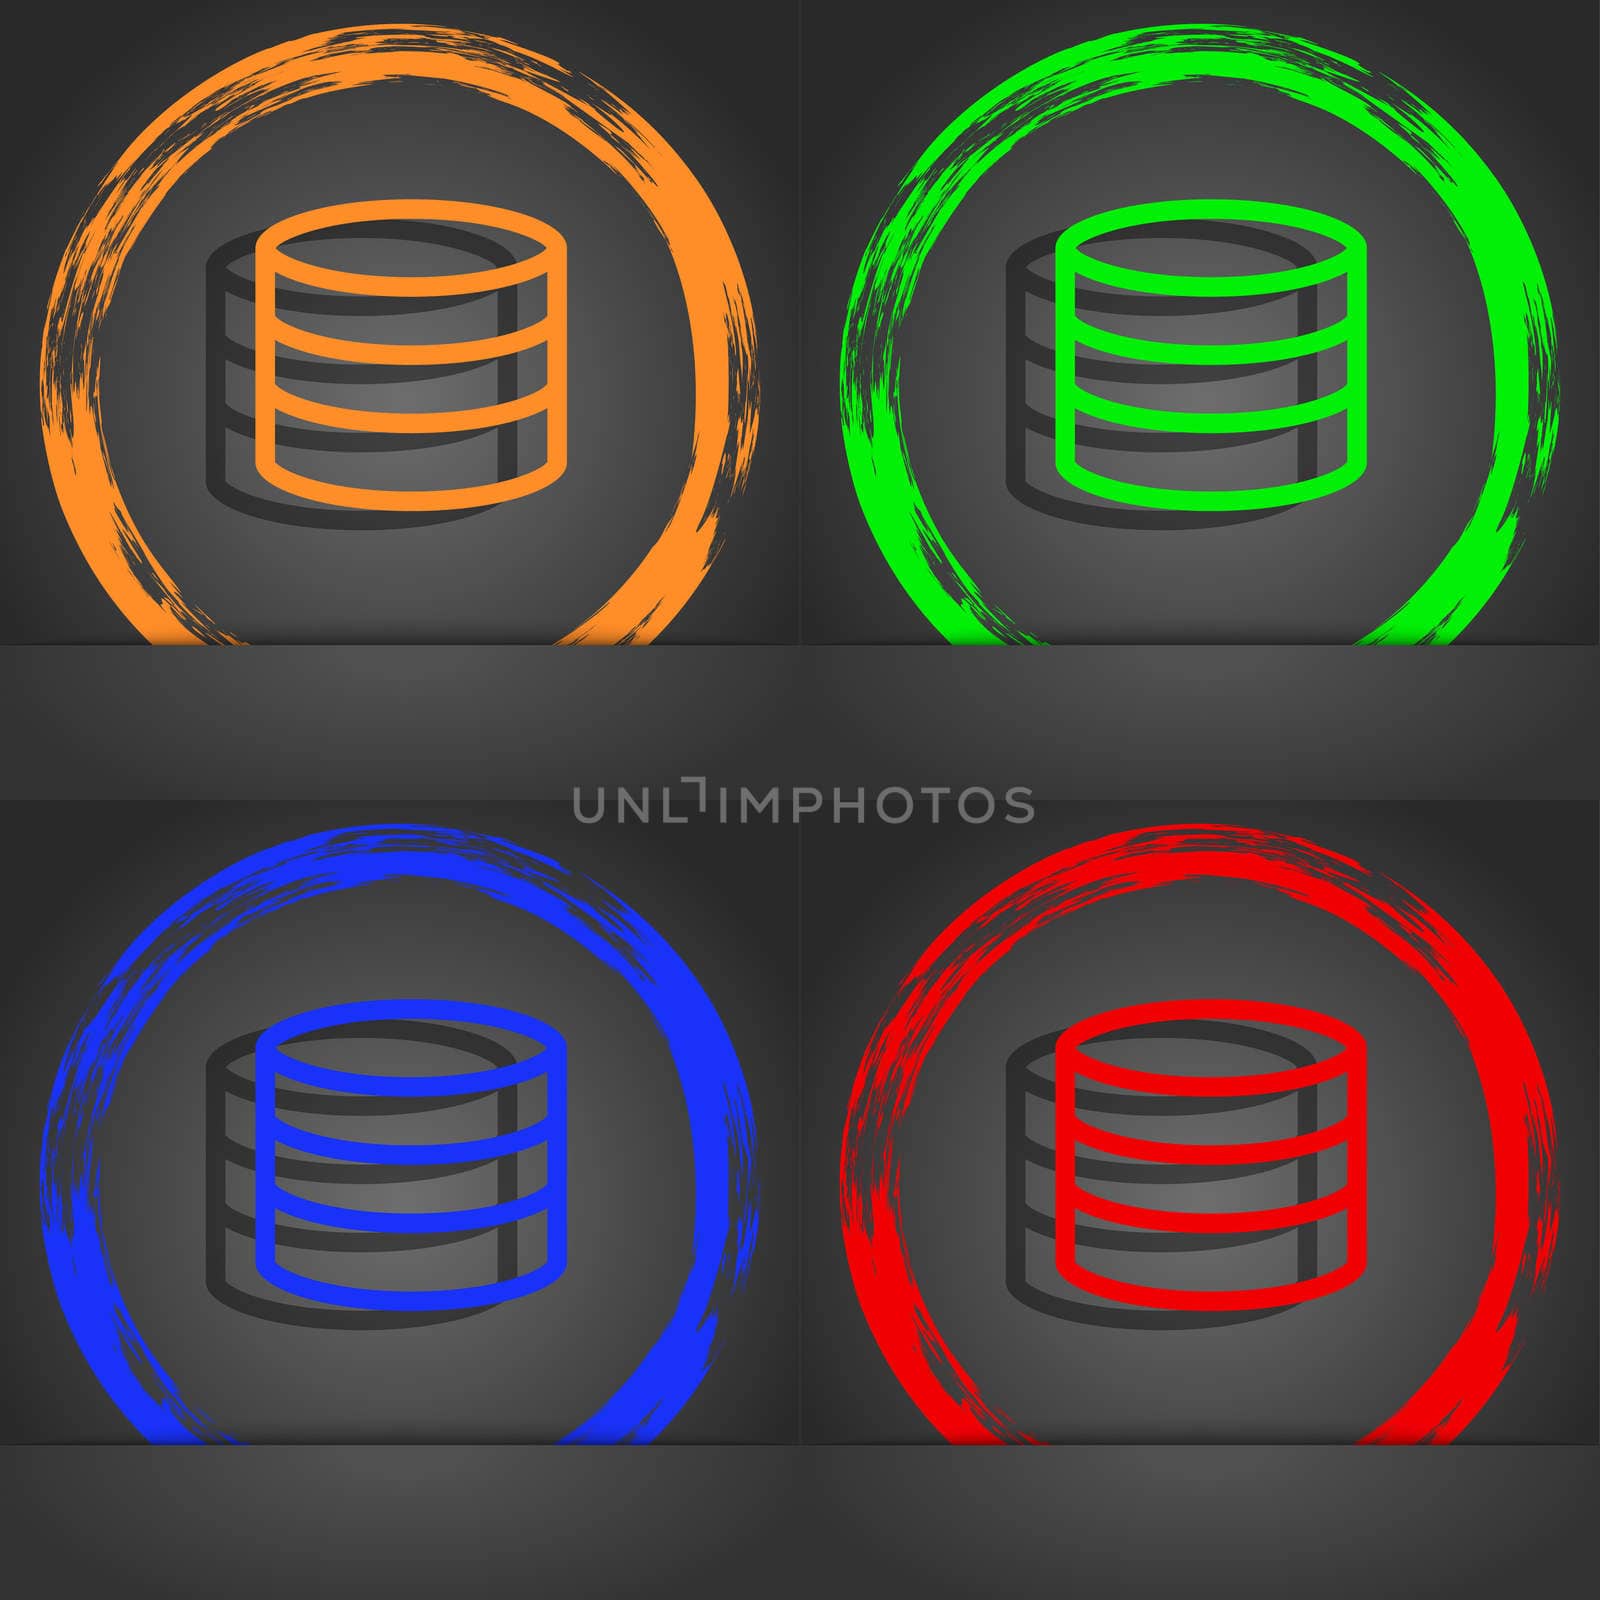 Hard disk and database icon symbol. Fashionable modern style. In the orange, green, blue, green design. illustration